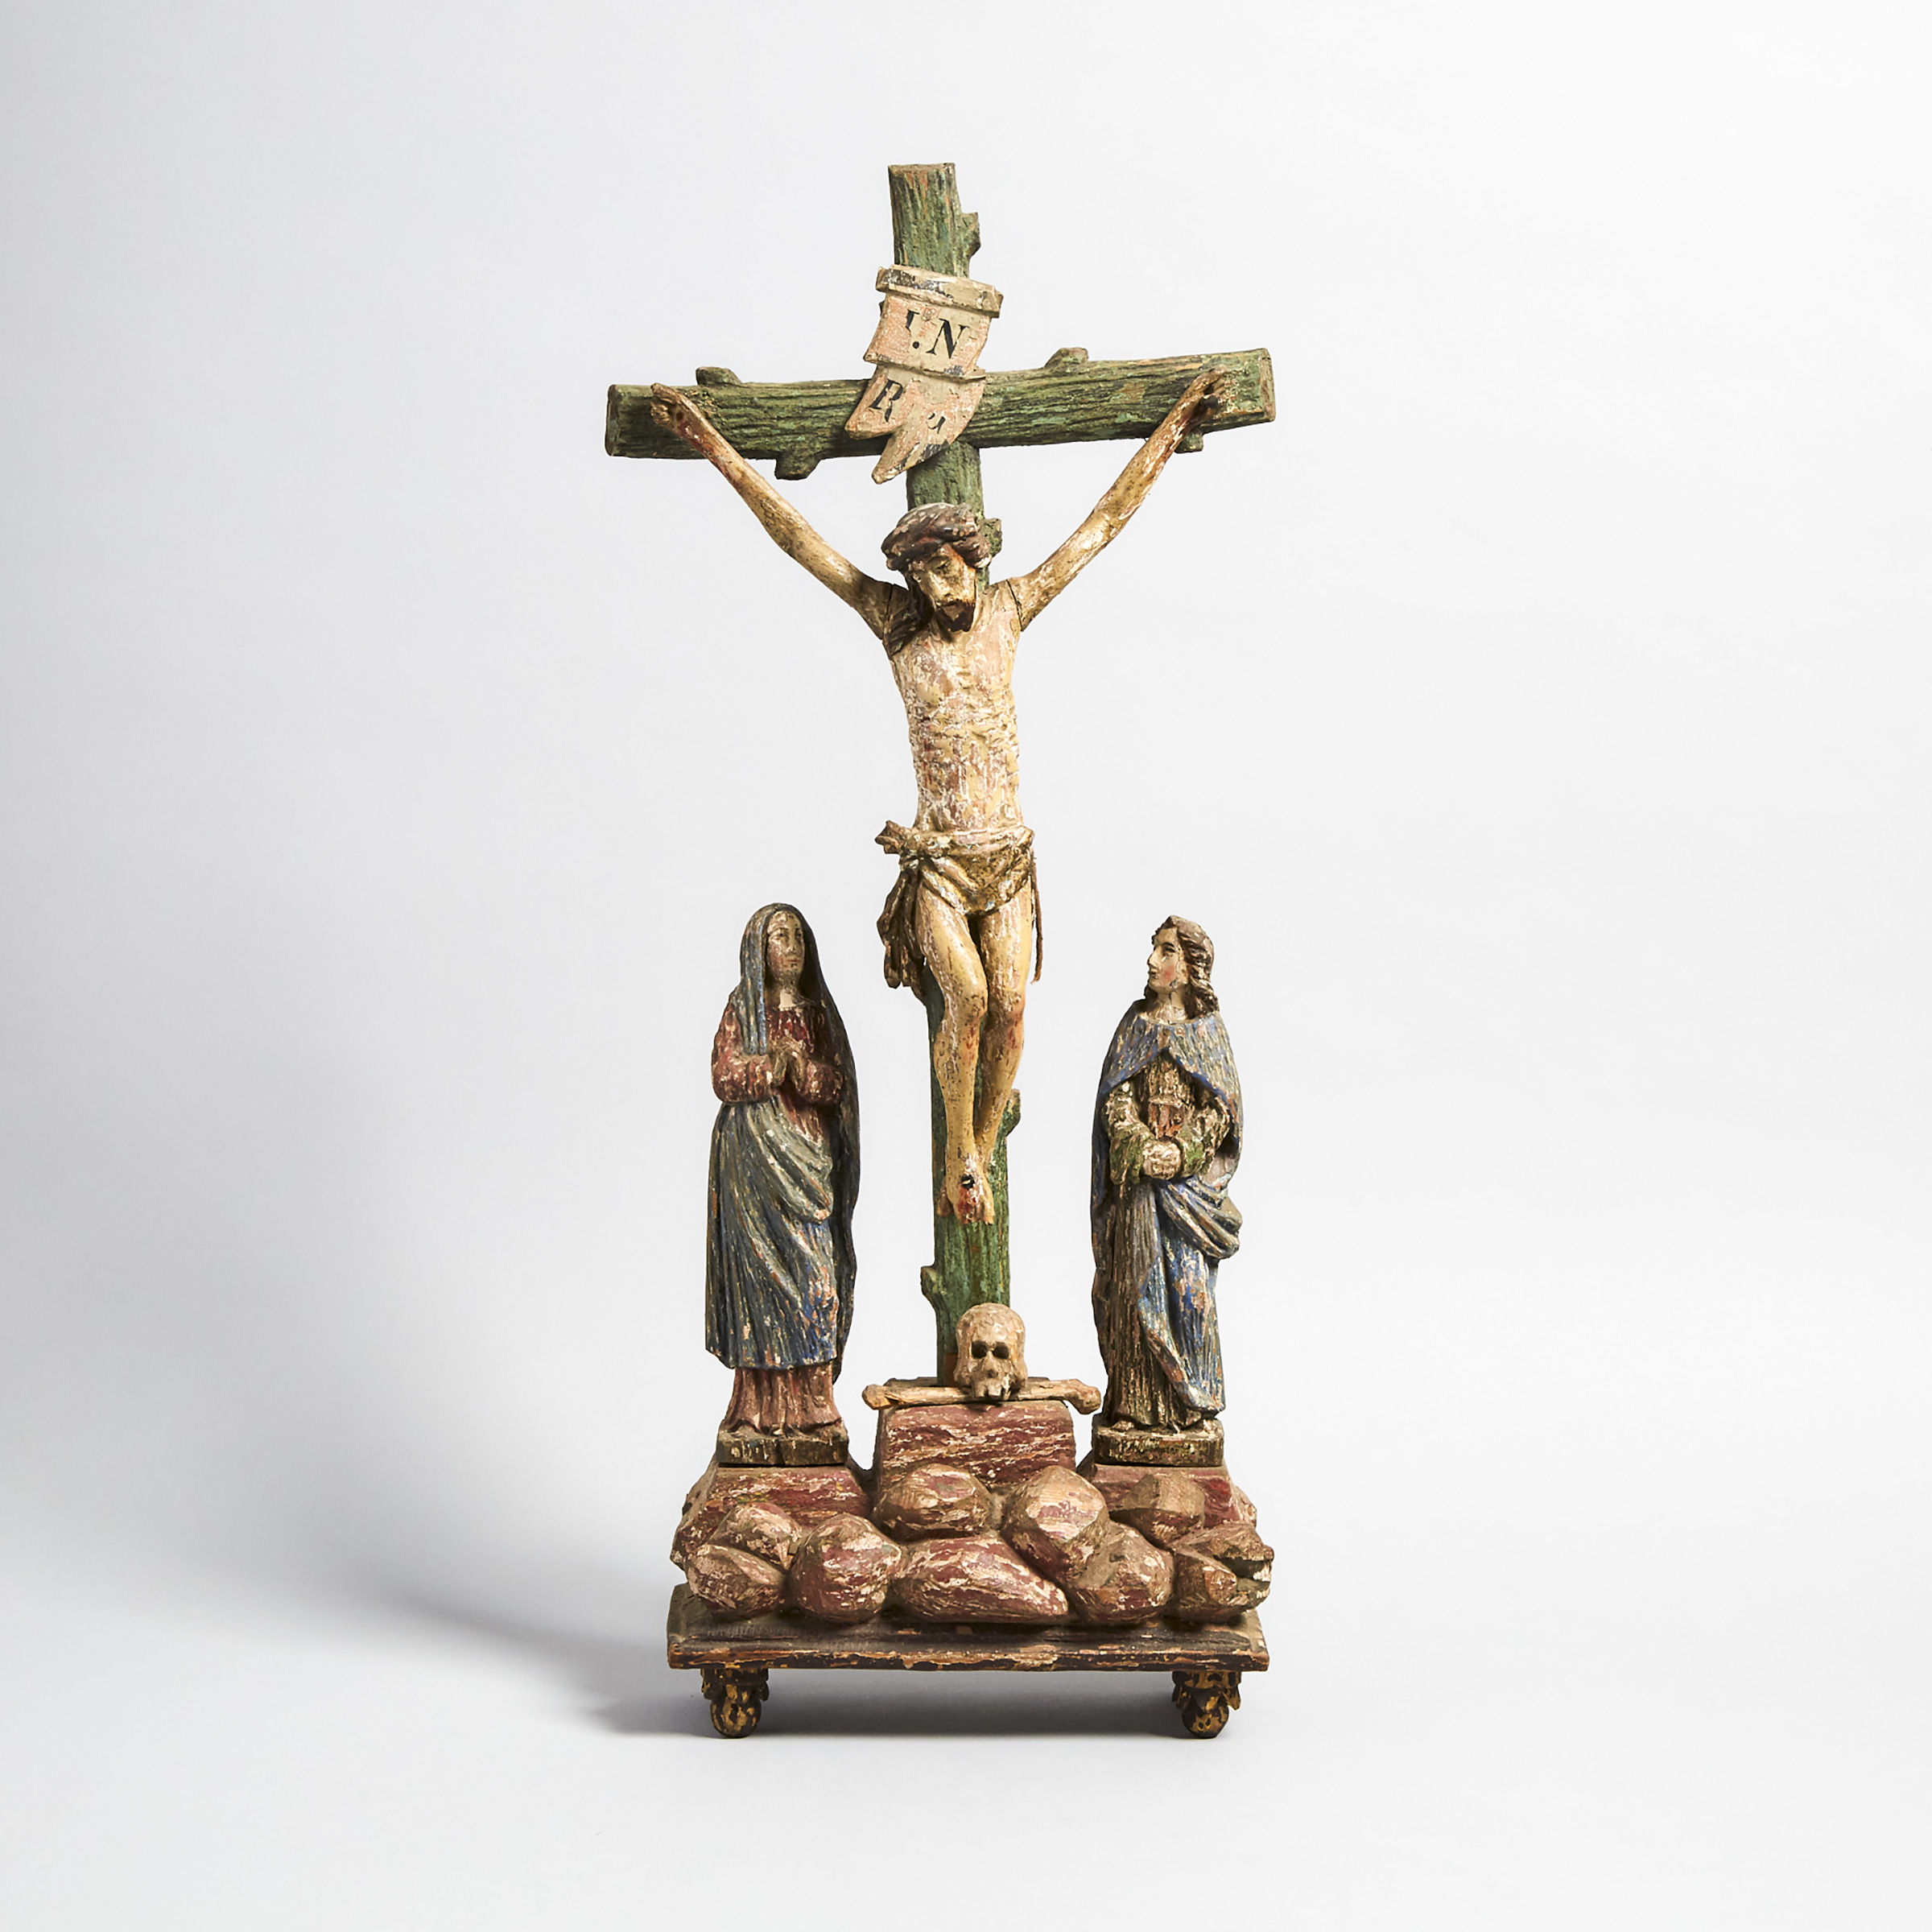 Spanish Colonial Carved and Polychromed Wooden Crucifixion Diorama, 19th century or earlier